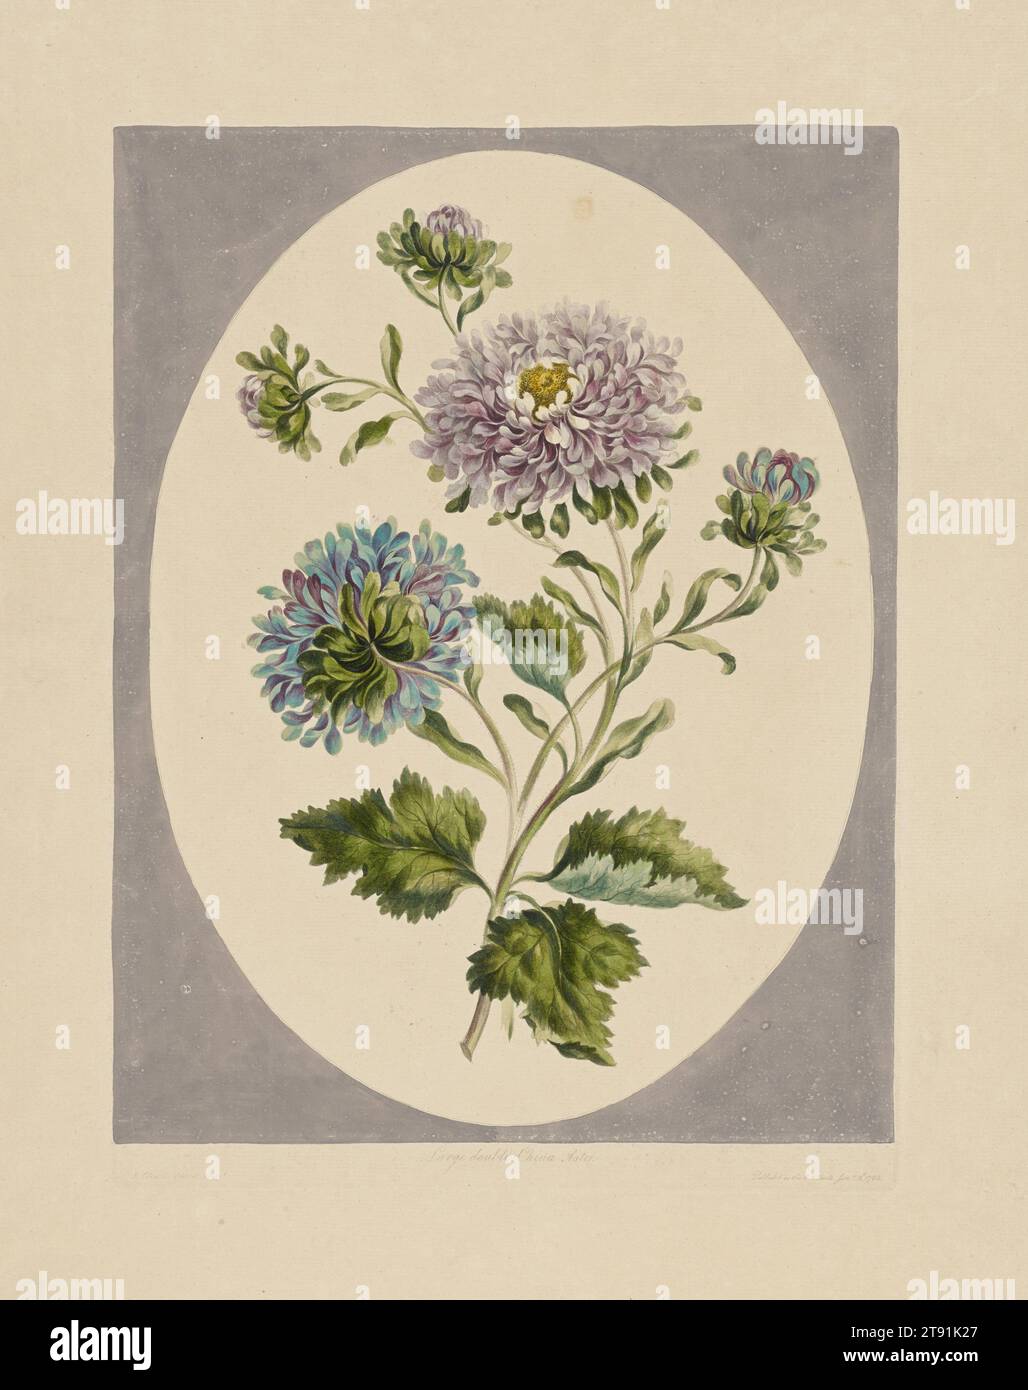 Large Double-China Aster, January 2, 1793, John Edwards, English, 1763 - 1806, 13 1/4 x 9 3/4 in. (33.66 x 24.77 cm) (plate), Hand-colored etching, printed in pale ink, England, 18th century Stock Photo